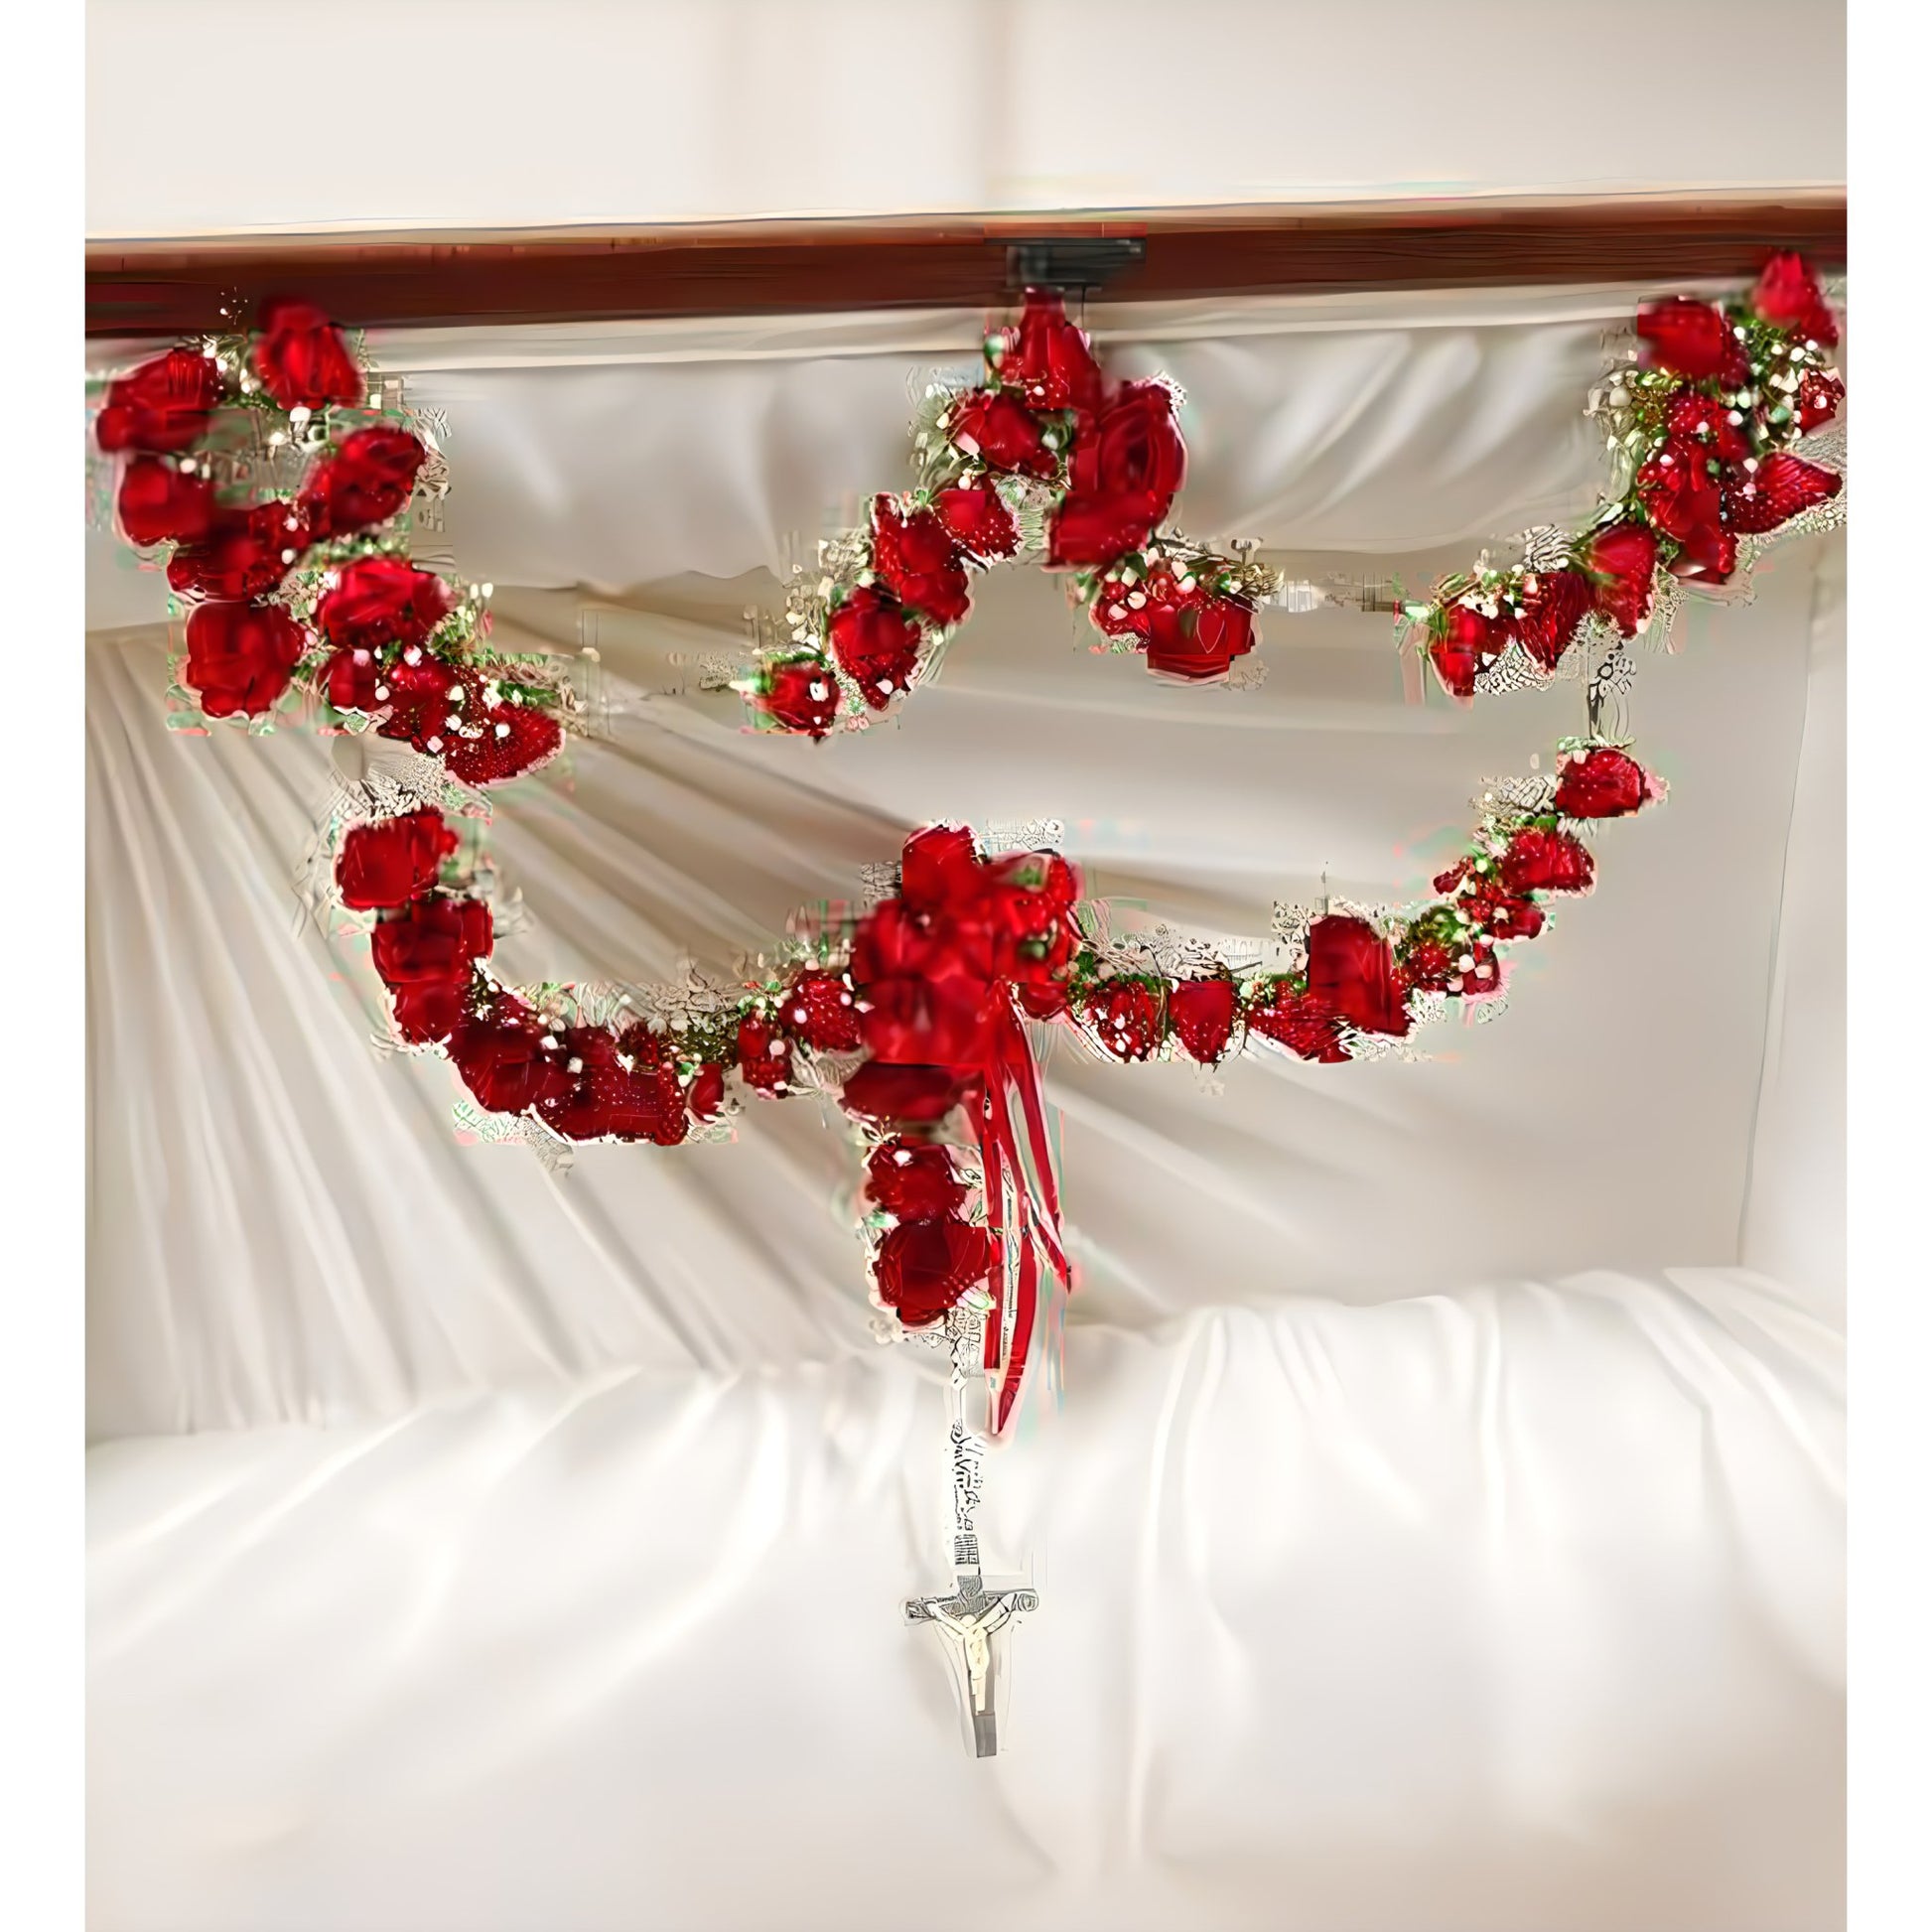 Large Rosary with Red Spray Roses - Floral_Arrangement - Flower Delivery NYC